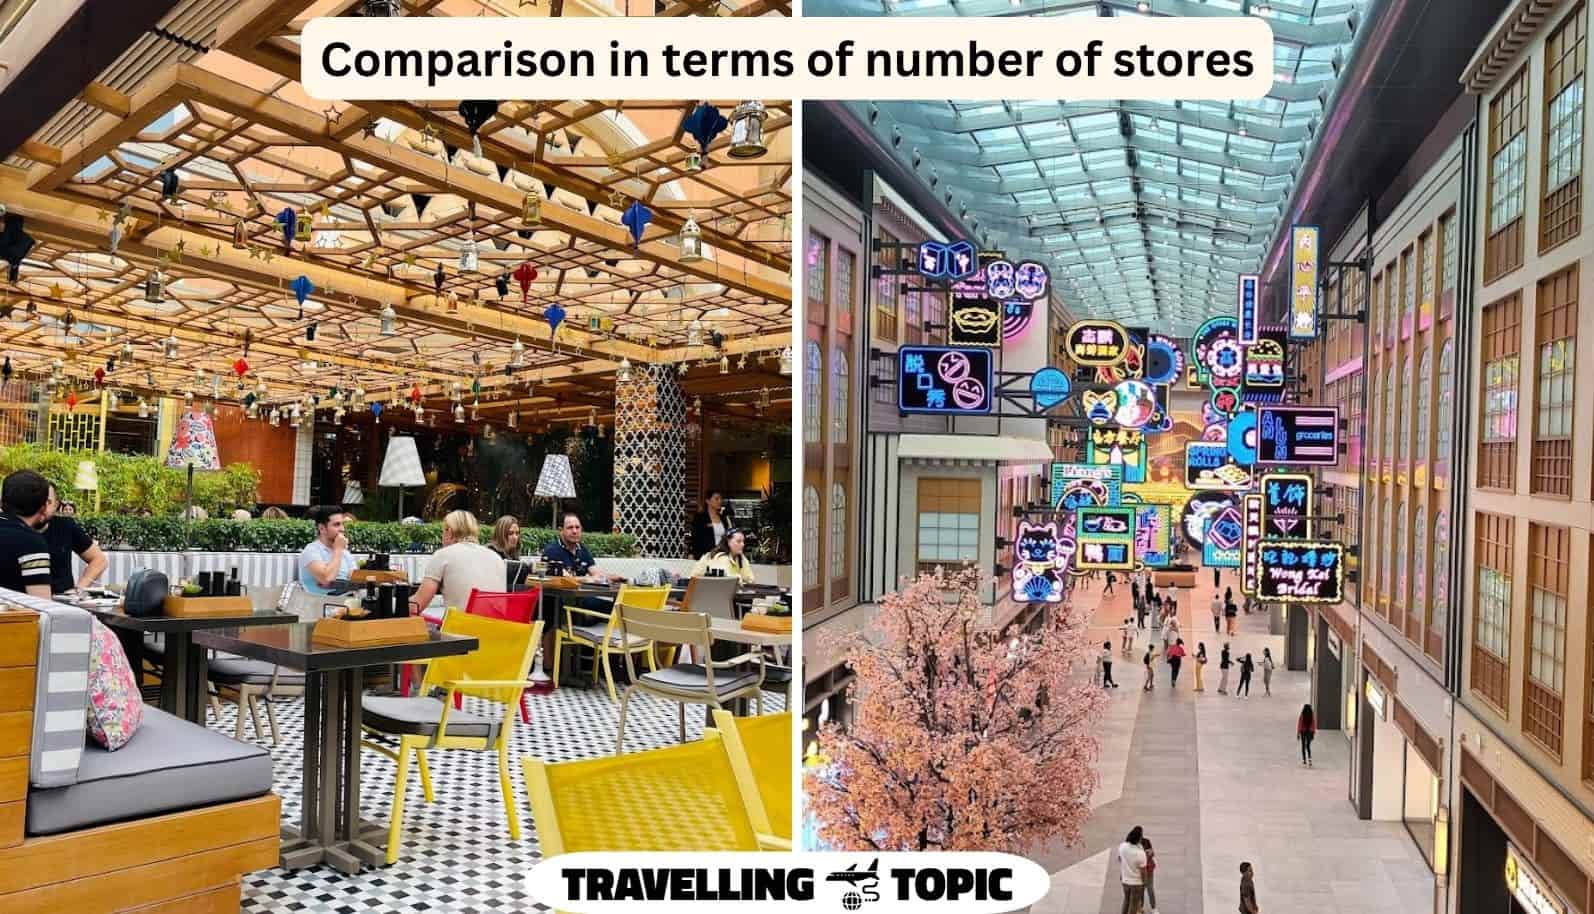 Comparison in terms of number of stores